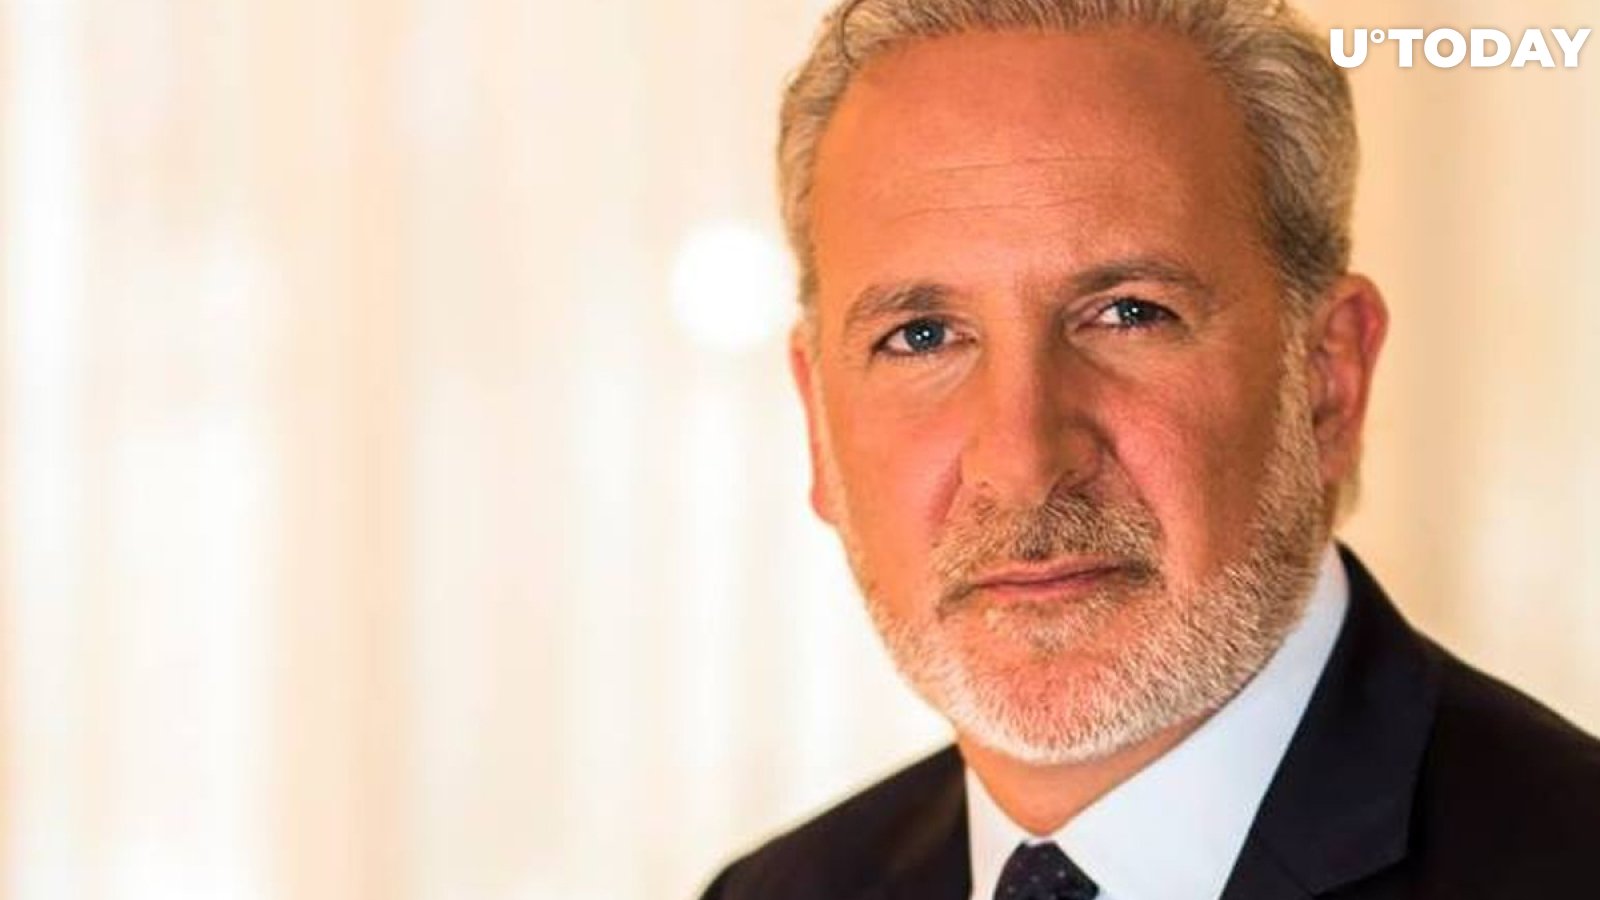 XRP Tanks to $0.19, Peter Schiff Takes a Jab at XRP